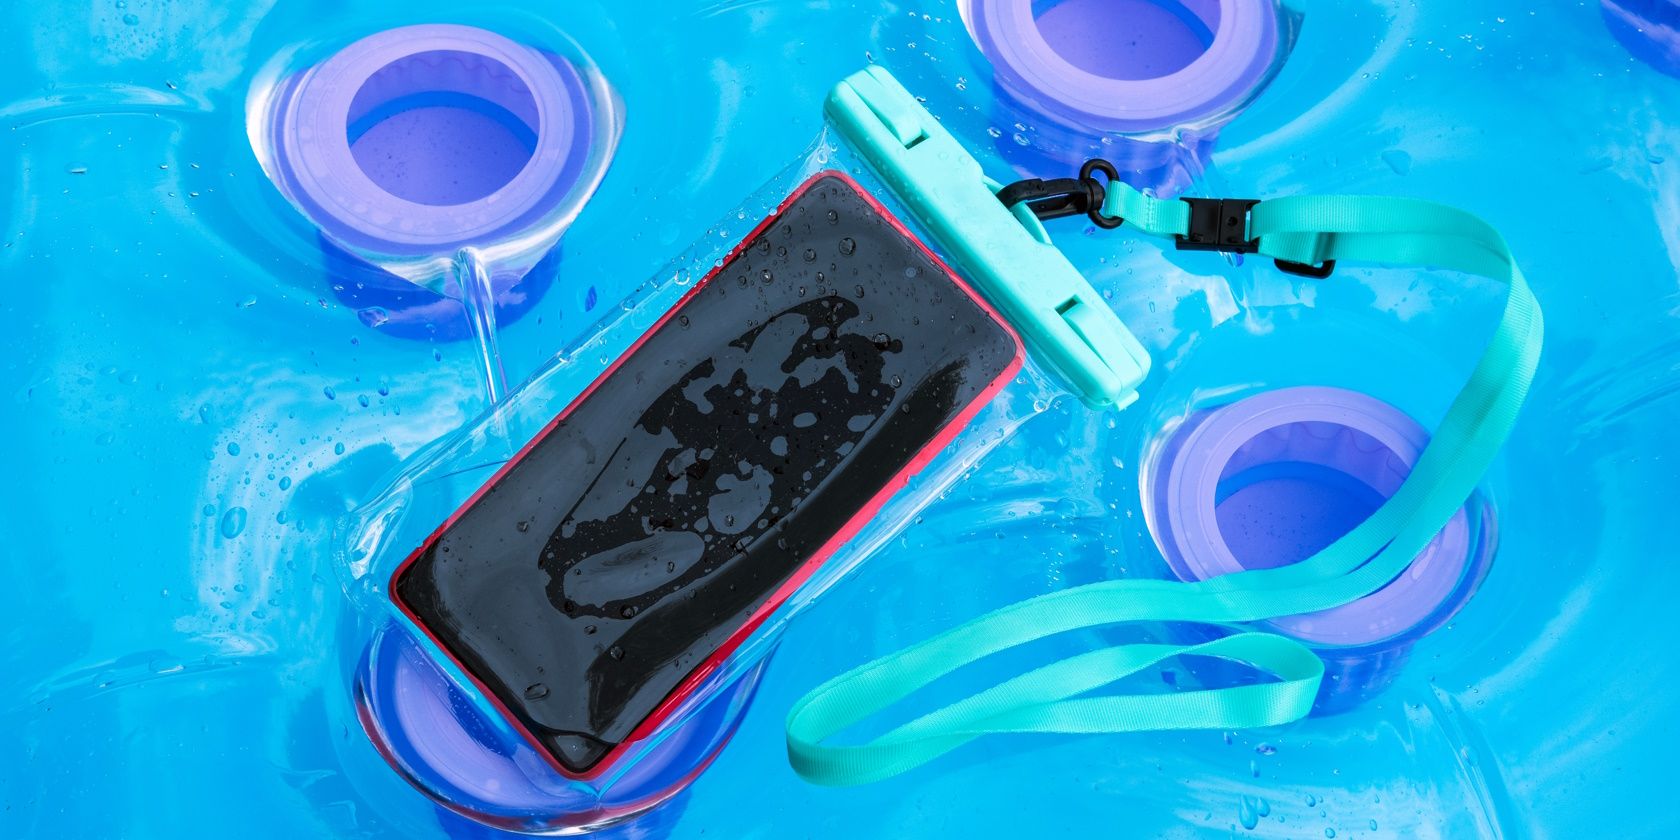 What Do Waterproof and Water-Resistant Mean?